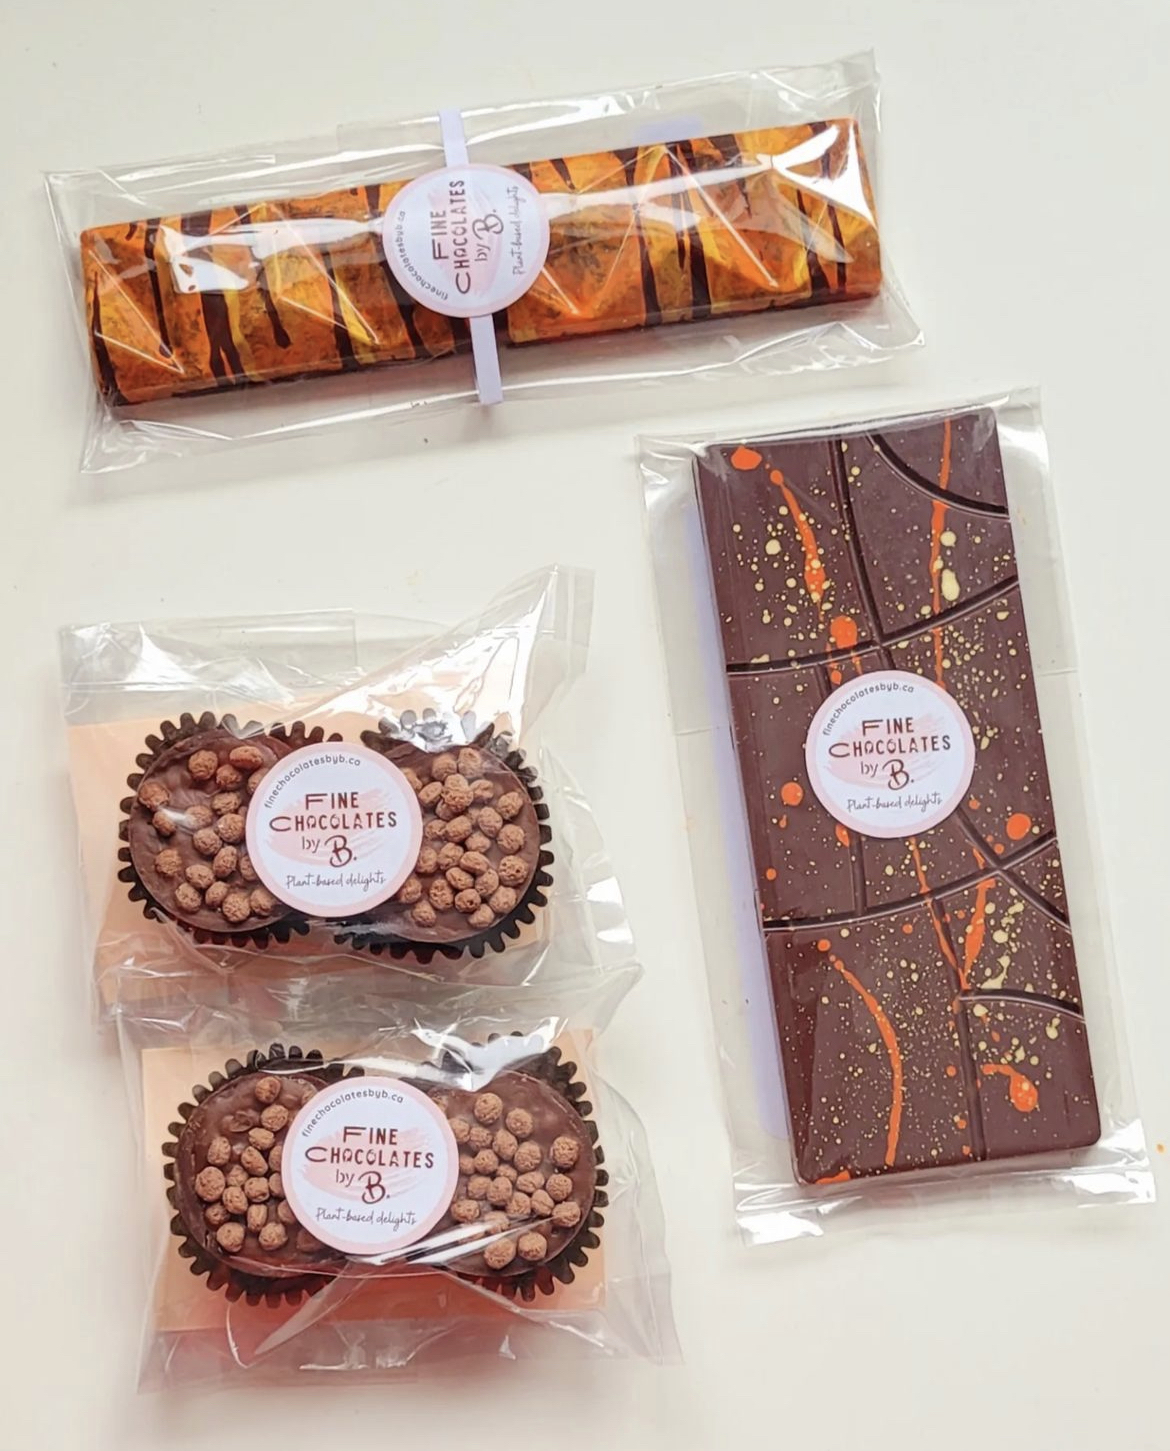 Milk chocolate bars and chocolate cups in clear packaging on a white background